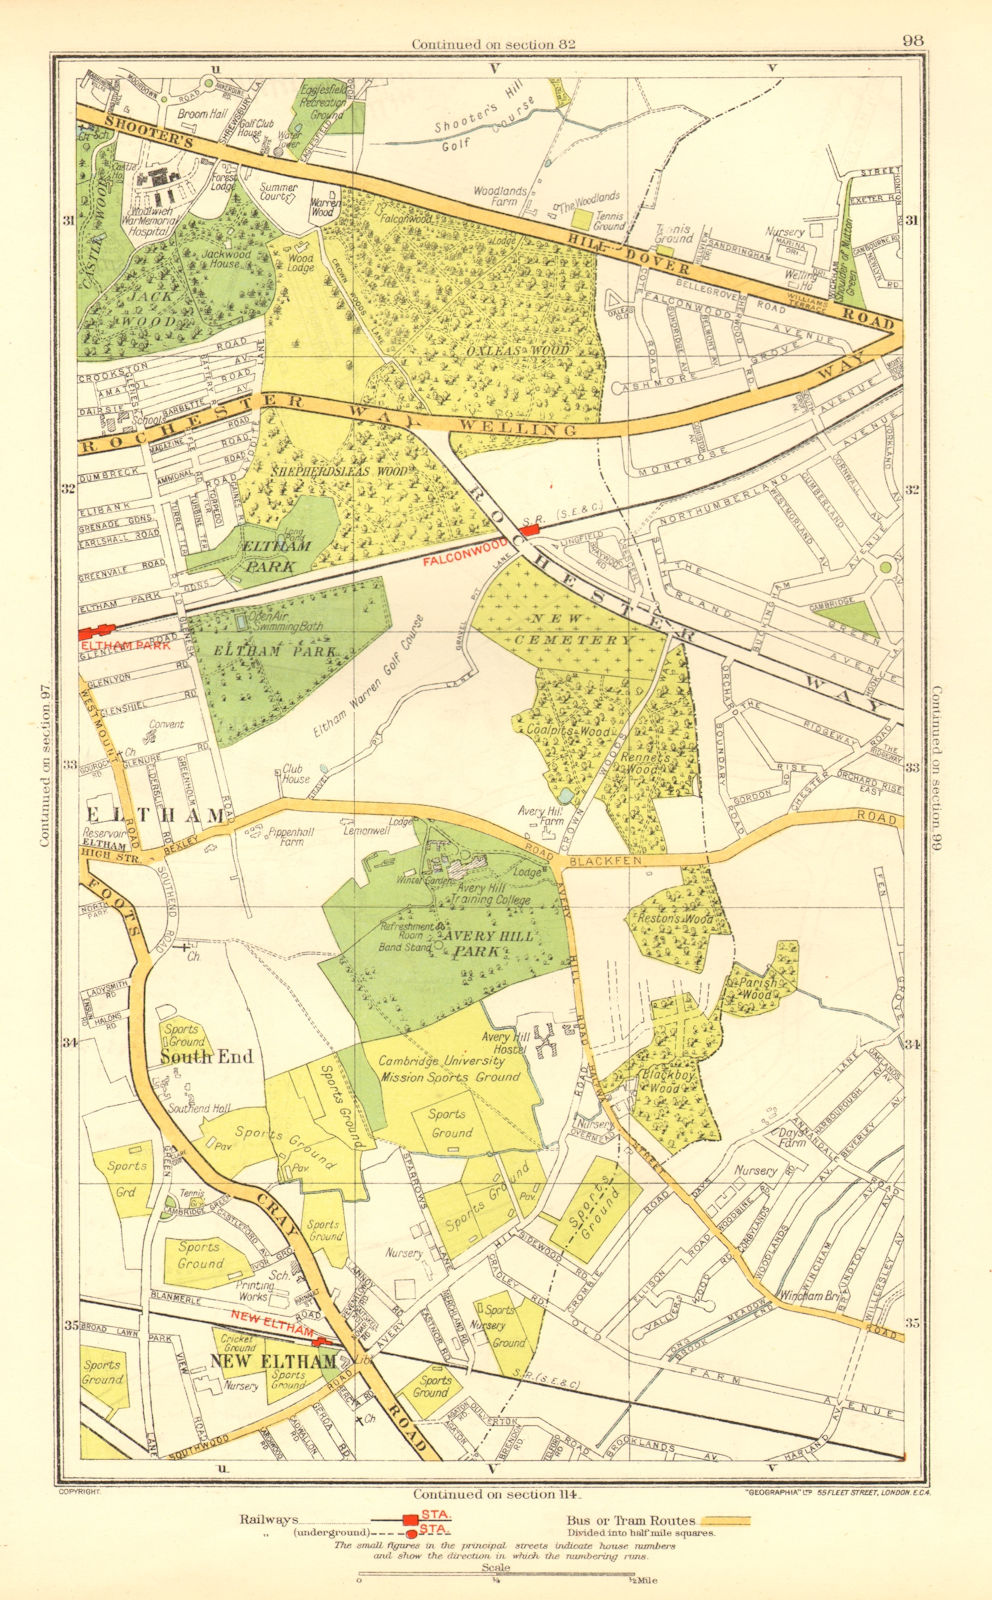 LONDON. New Eltham Shooter's Hill South End Eltham Park Pope Street 1937 map